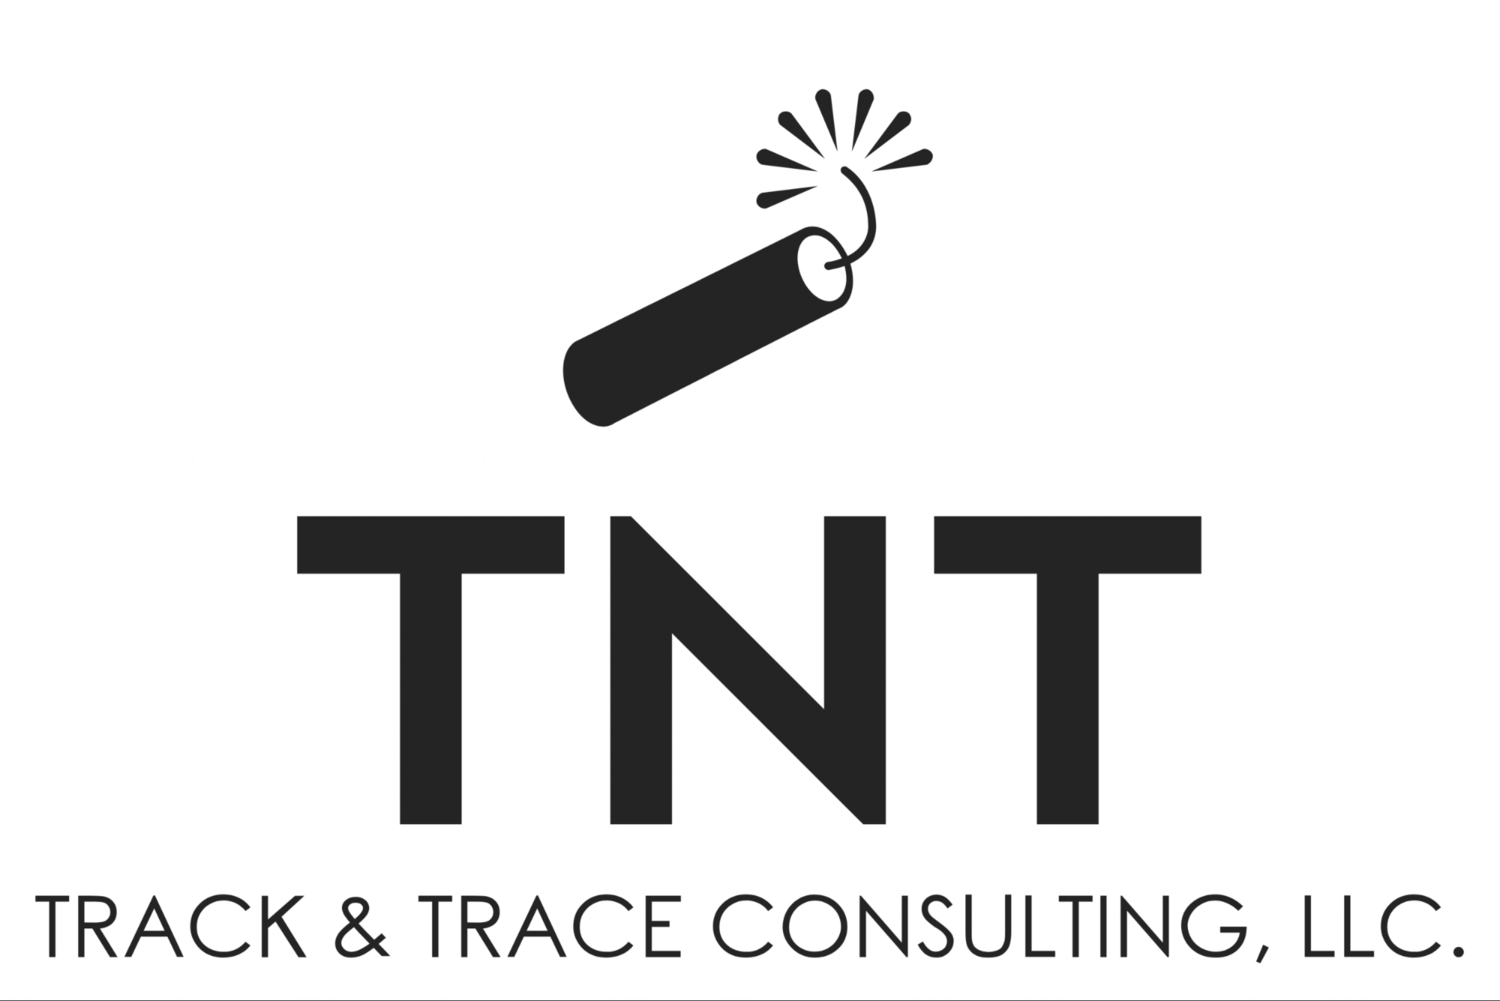 Track & Trace Consulting, LLC.